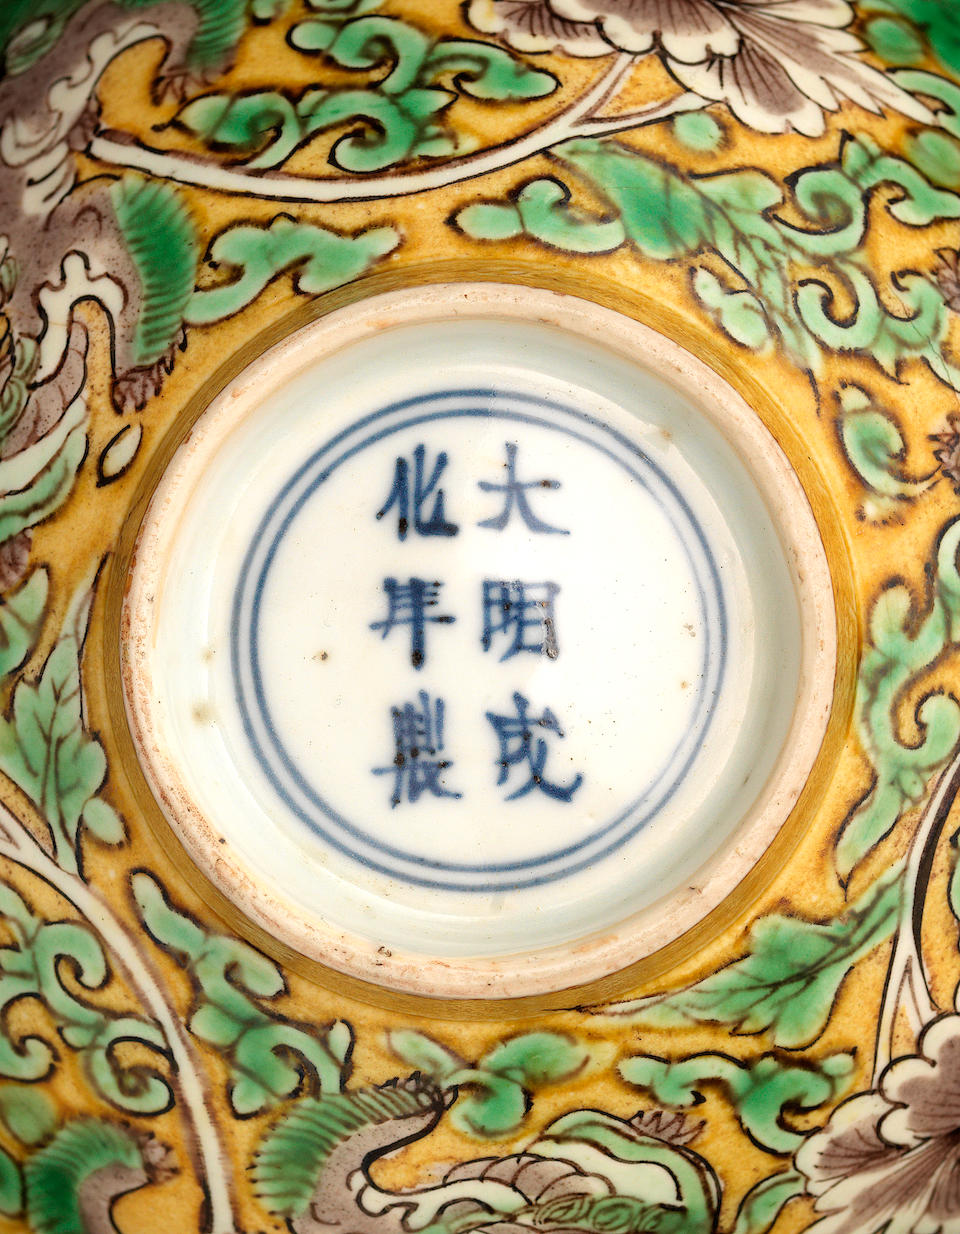 A green, yellow and aubergine 'lion and phoenix' bowl 17th century